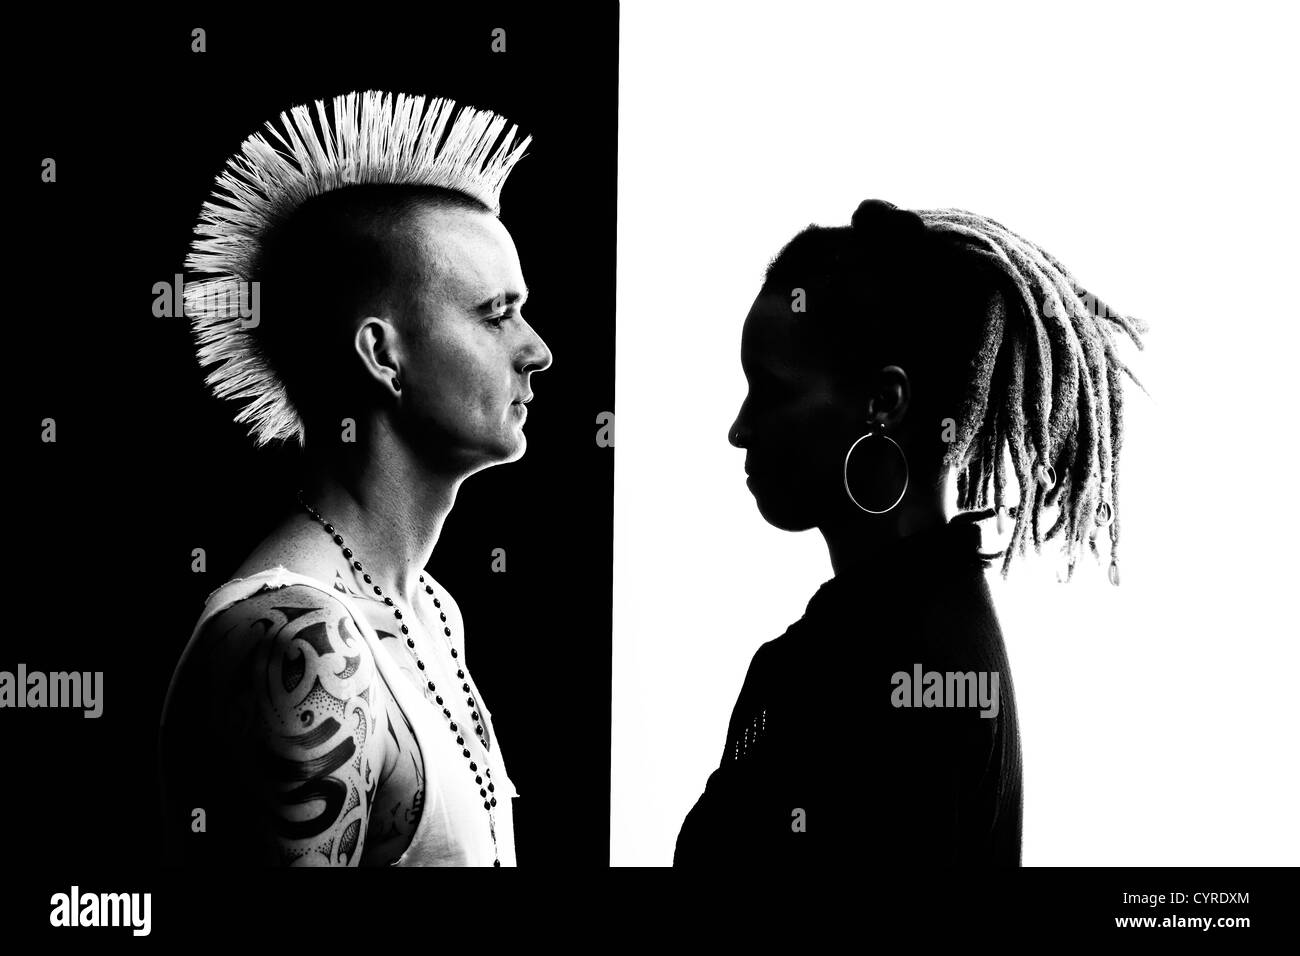 Caucasian Man with Mohawk and African-American Woman with Dreadlocks Stock Photo